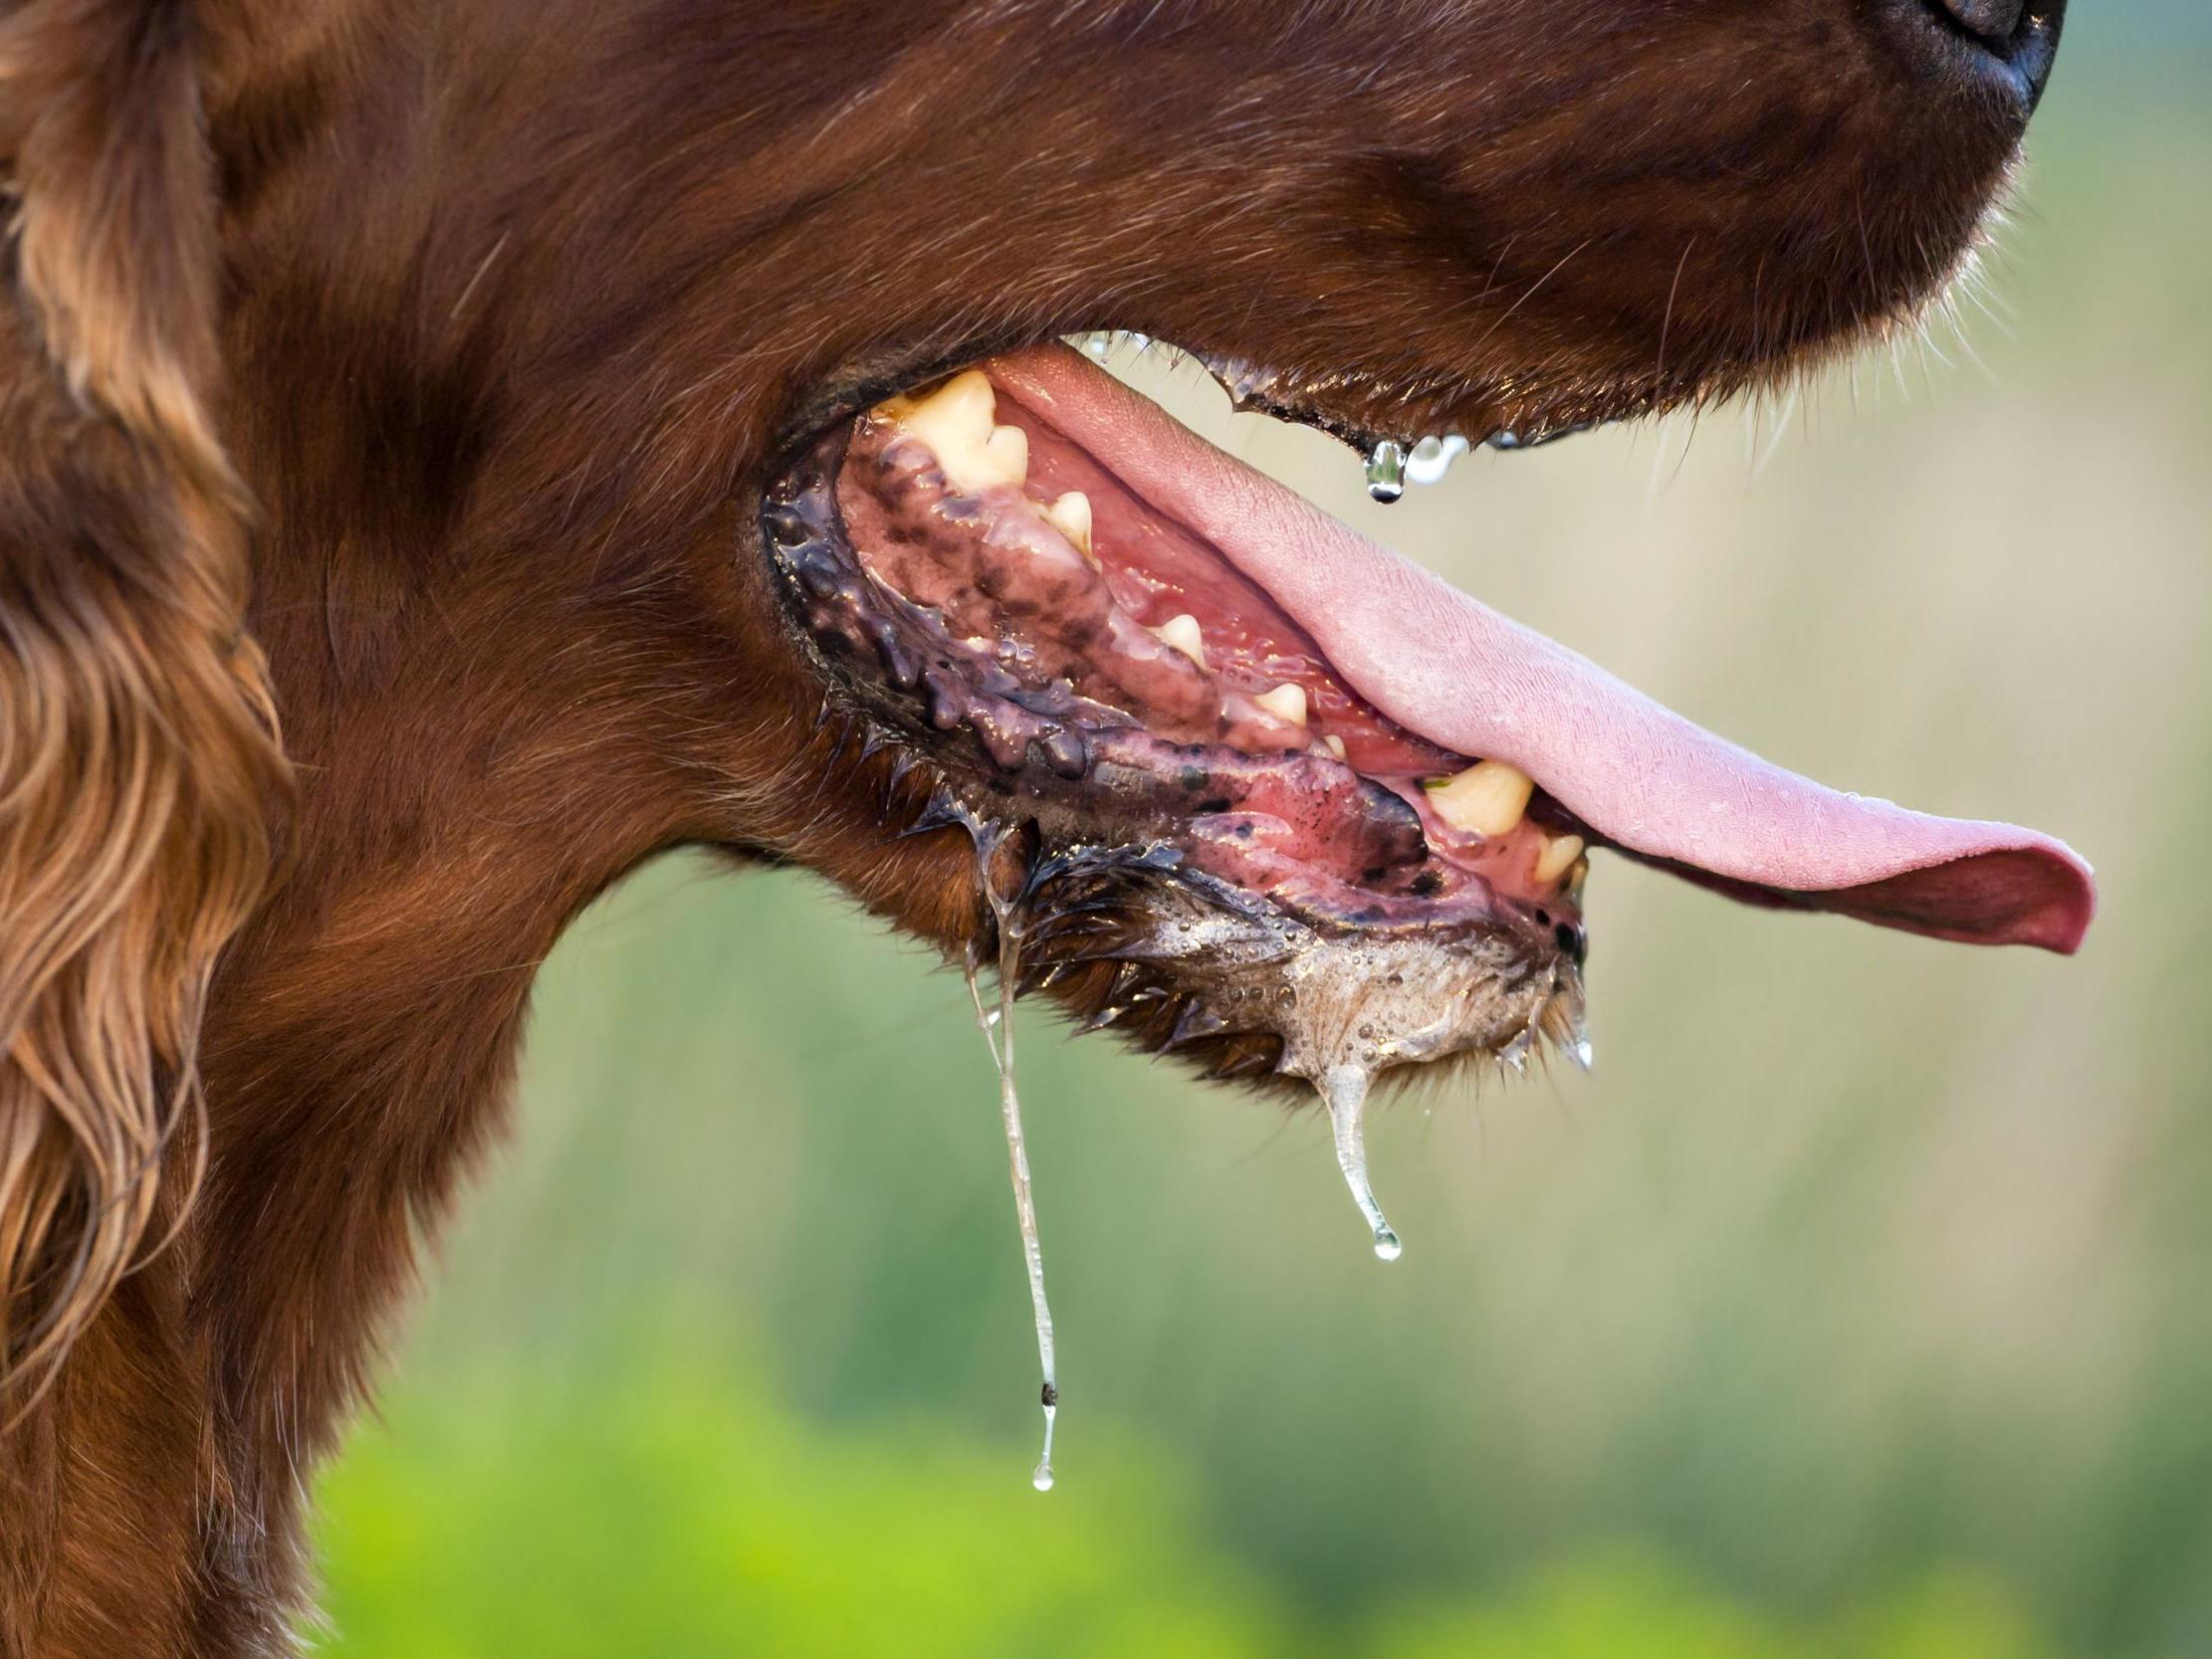 capnocytophaga canimorsus is a bacterium commonly found in the mouths of dogs and cats.